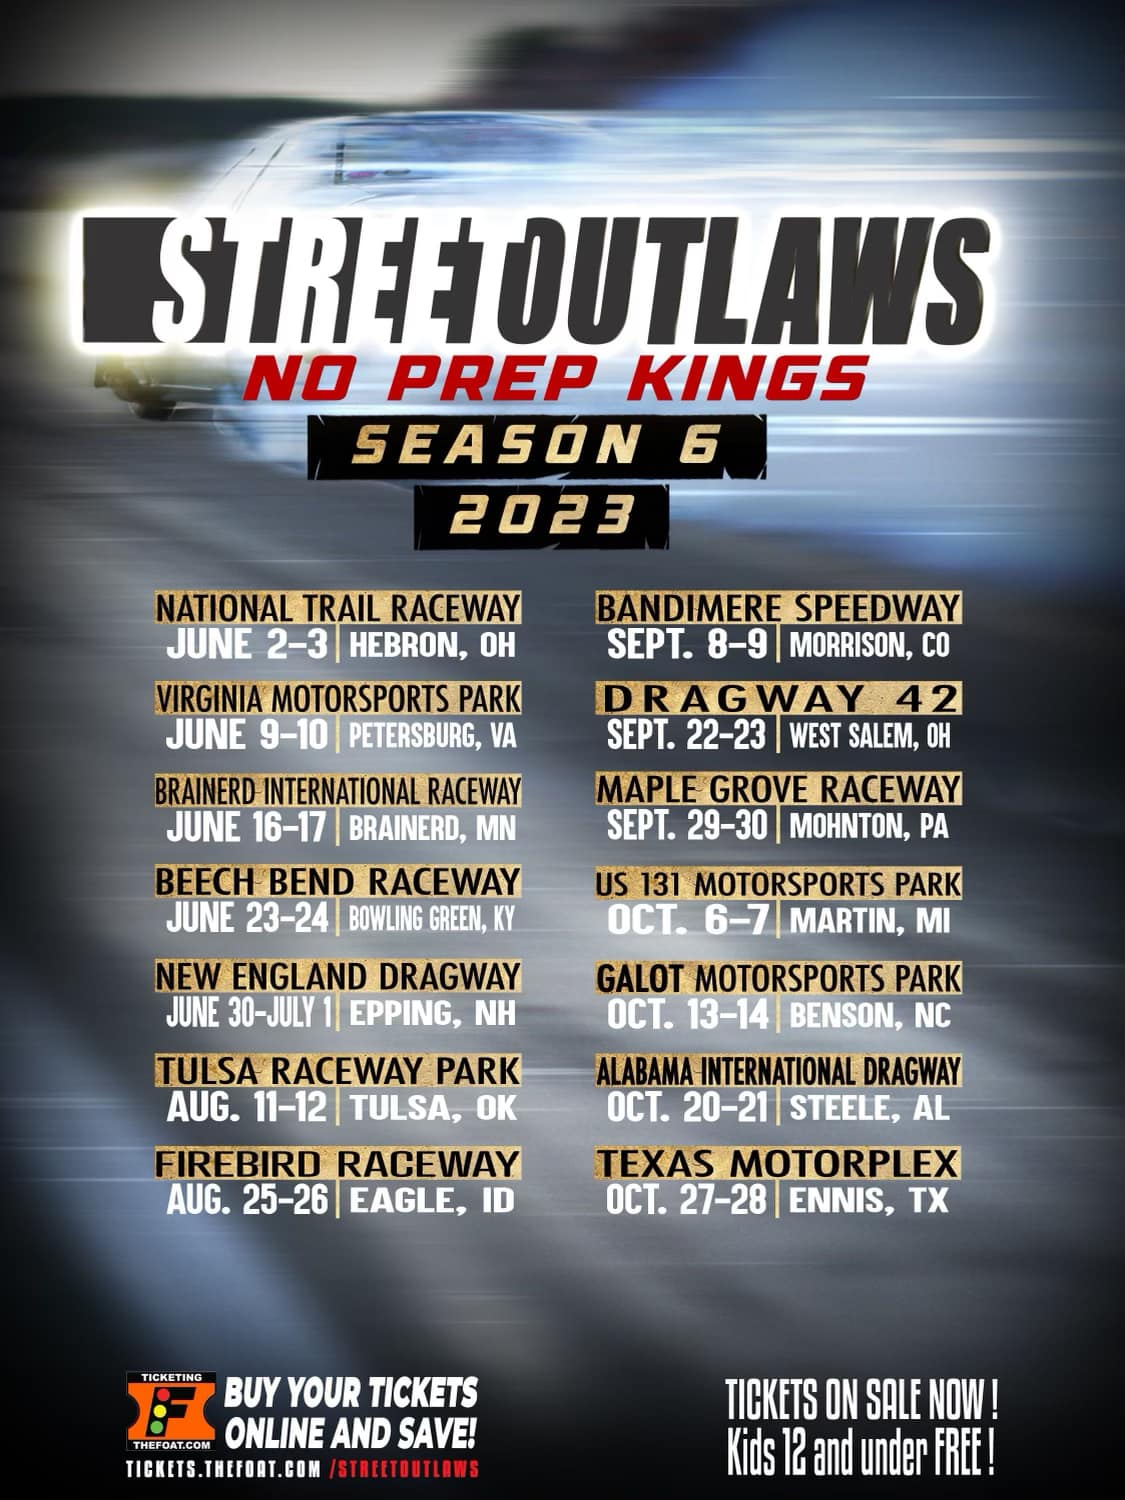 Street Outlaws No Prep Kings OFFICIAL SCHEDULE